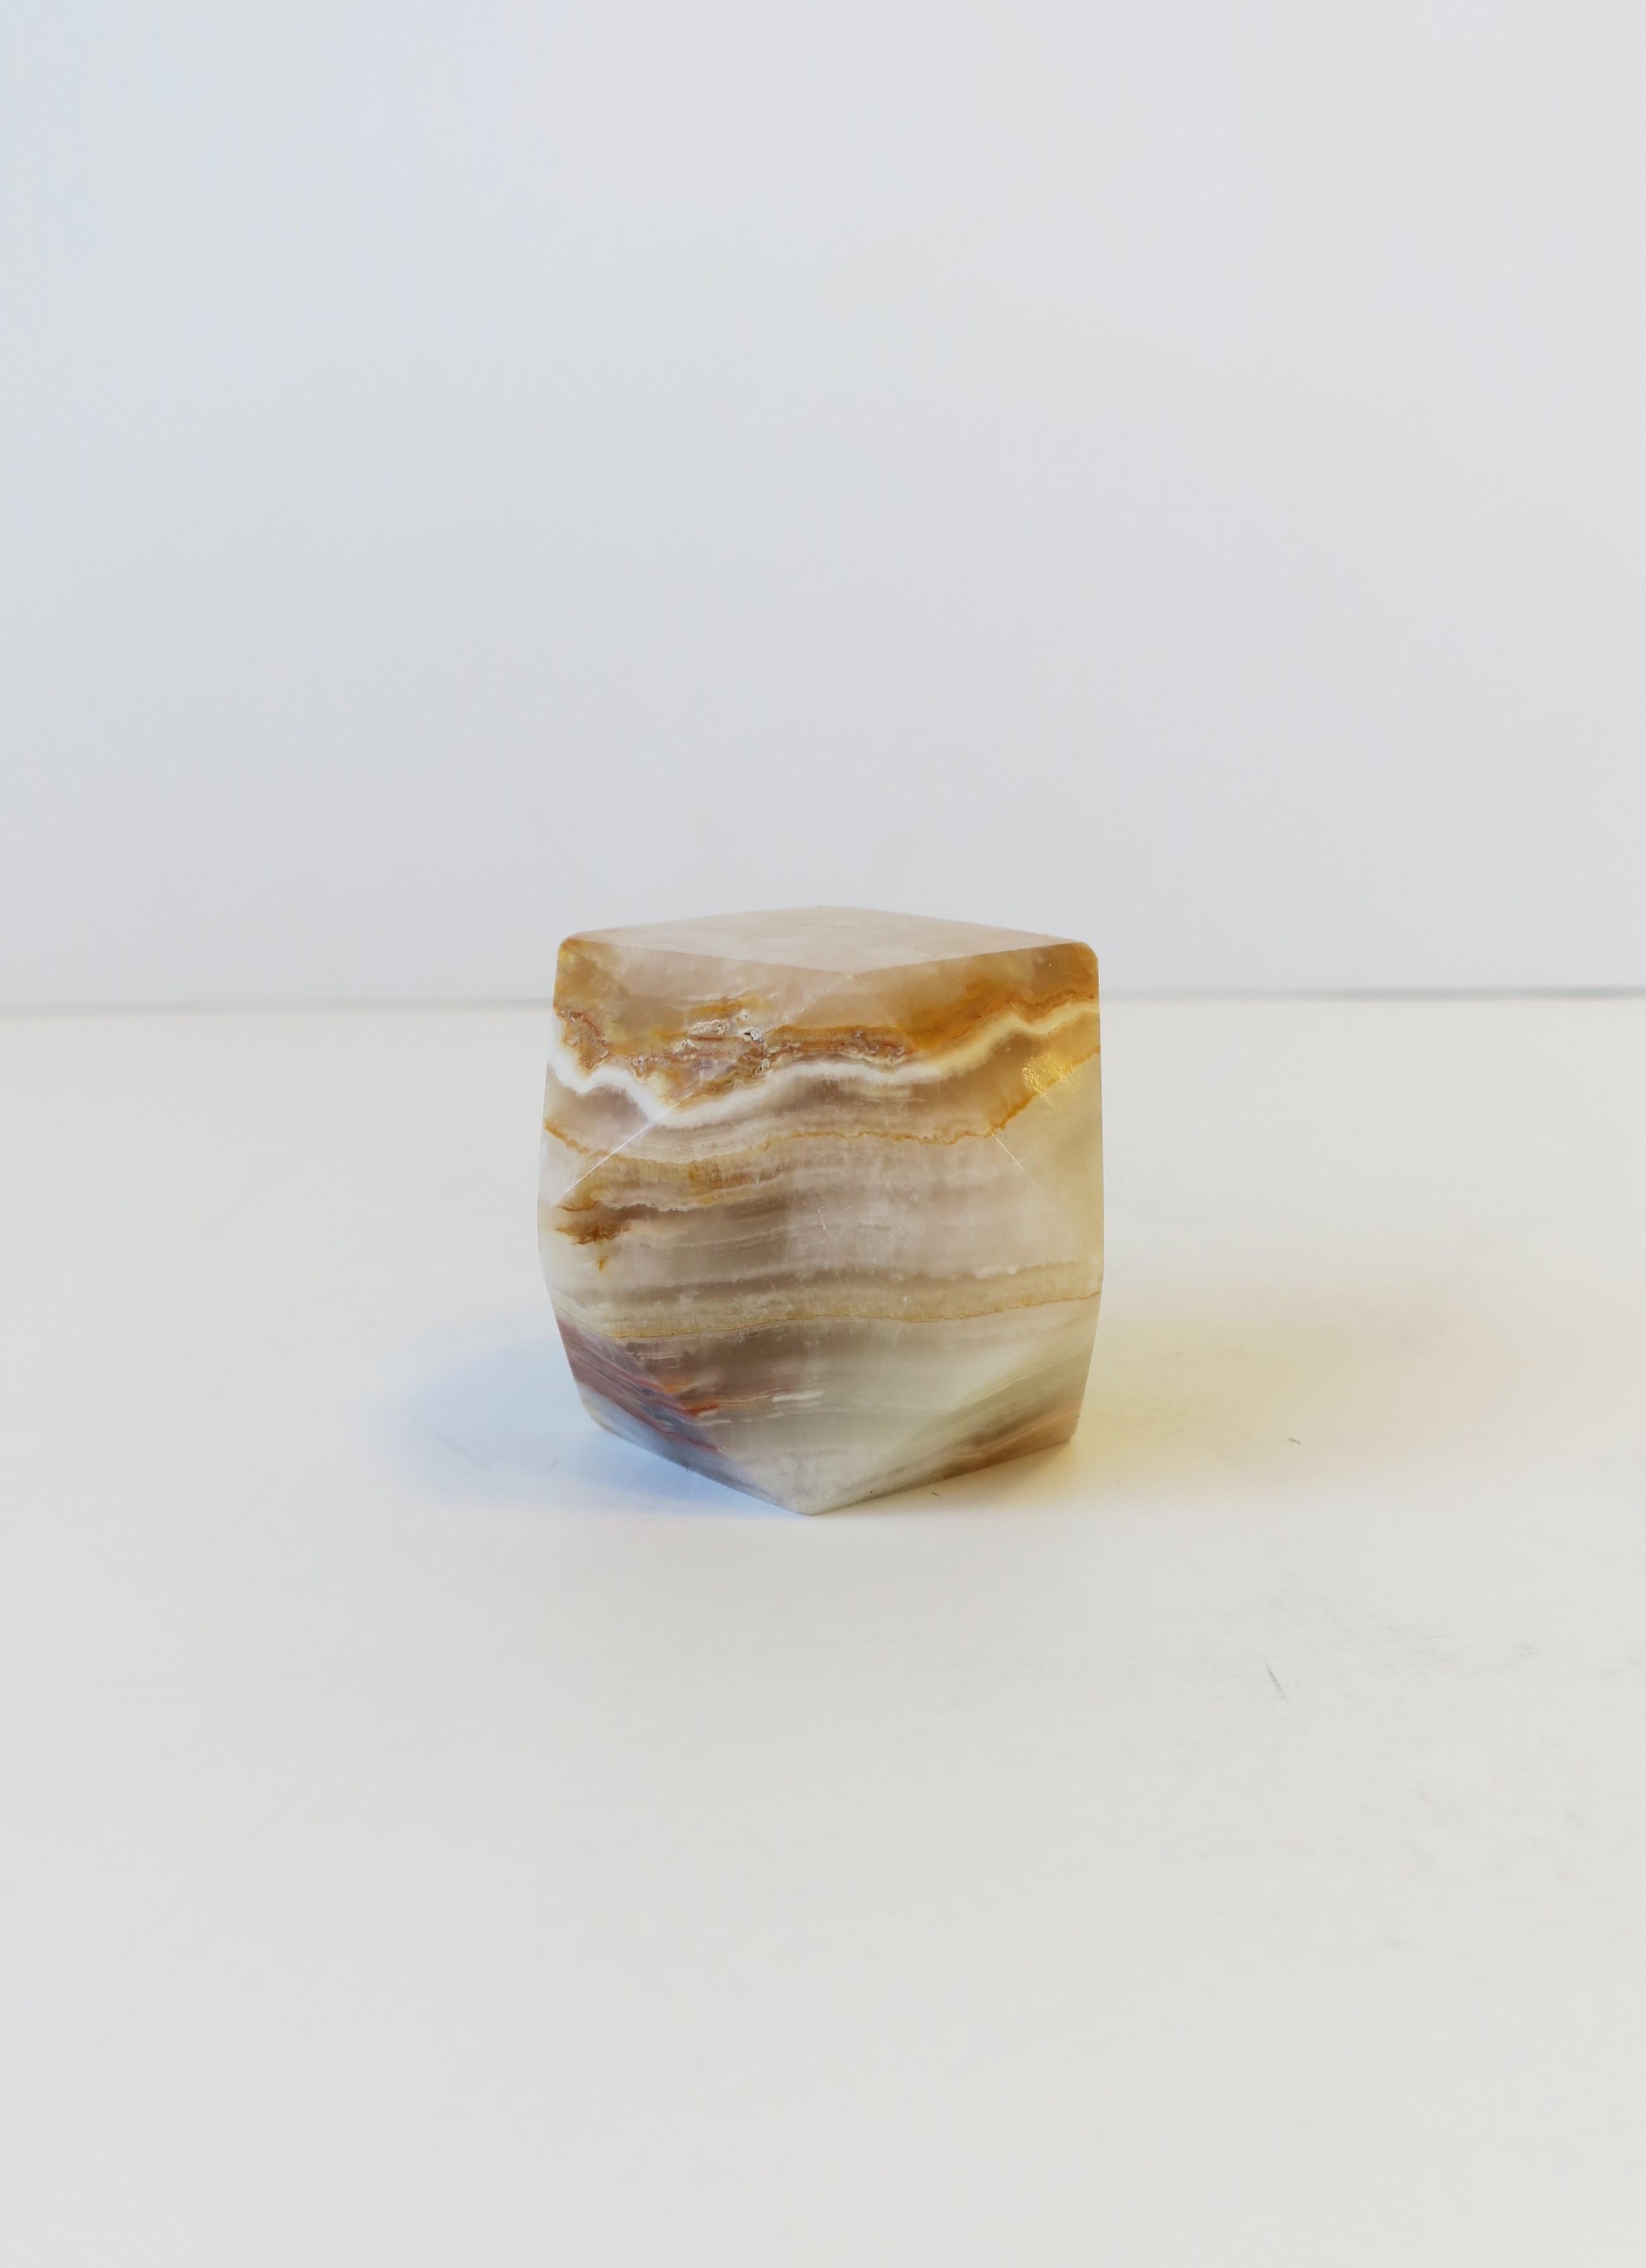 Polished Italian Onyx Marble Desk Paperweight Decorative Object, 1970s For Sale